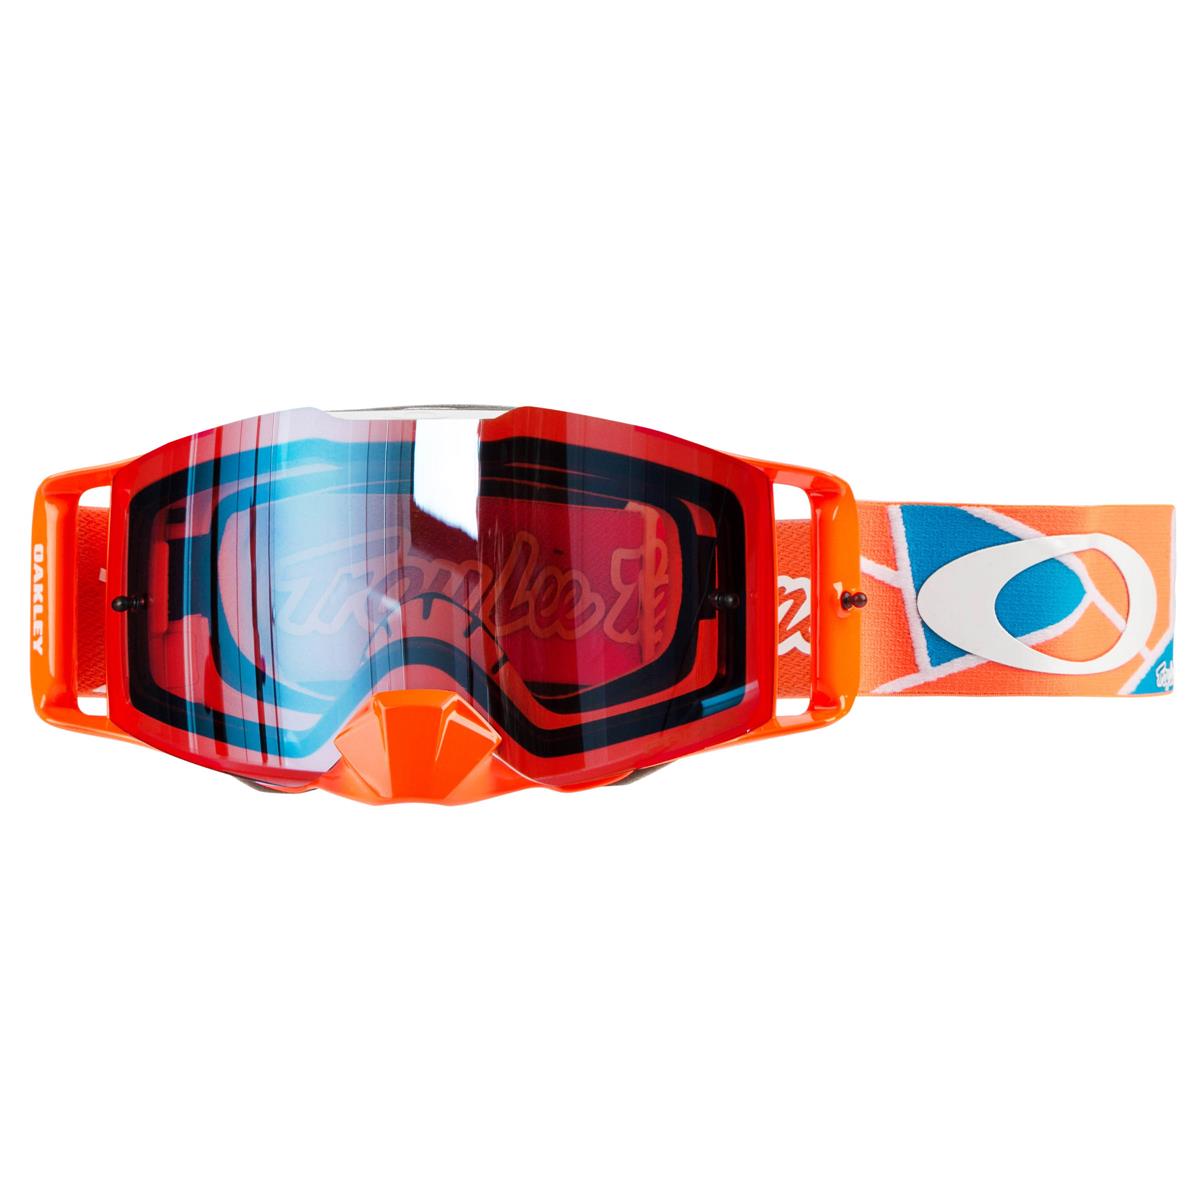 Oakley Masque Front Line MX Troy Lee Designs Metric Red Org - Prizm Sapphire Anti-Fog